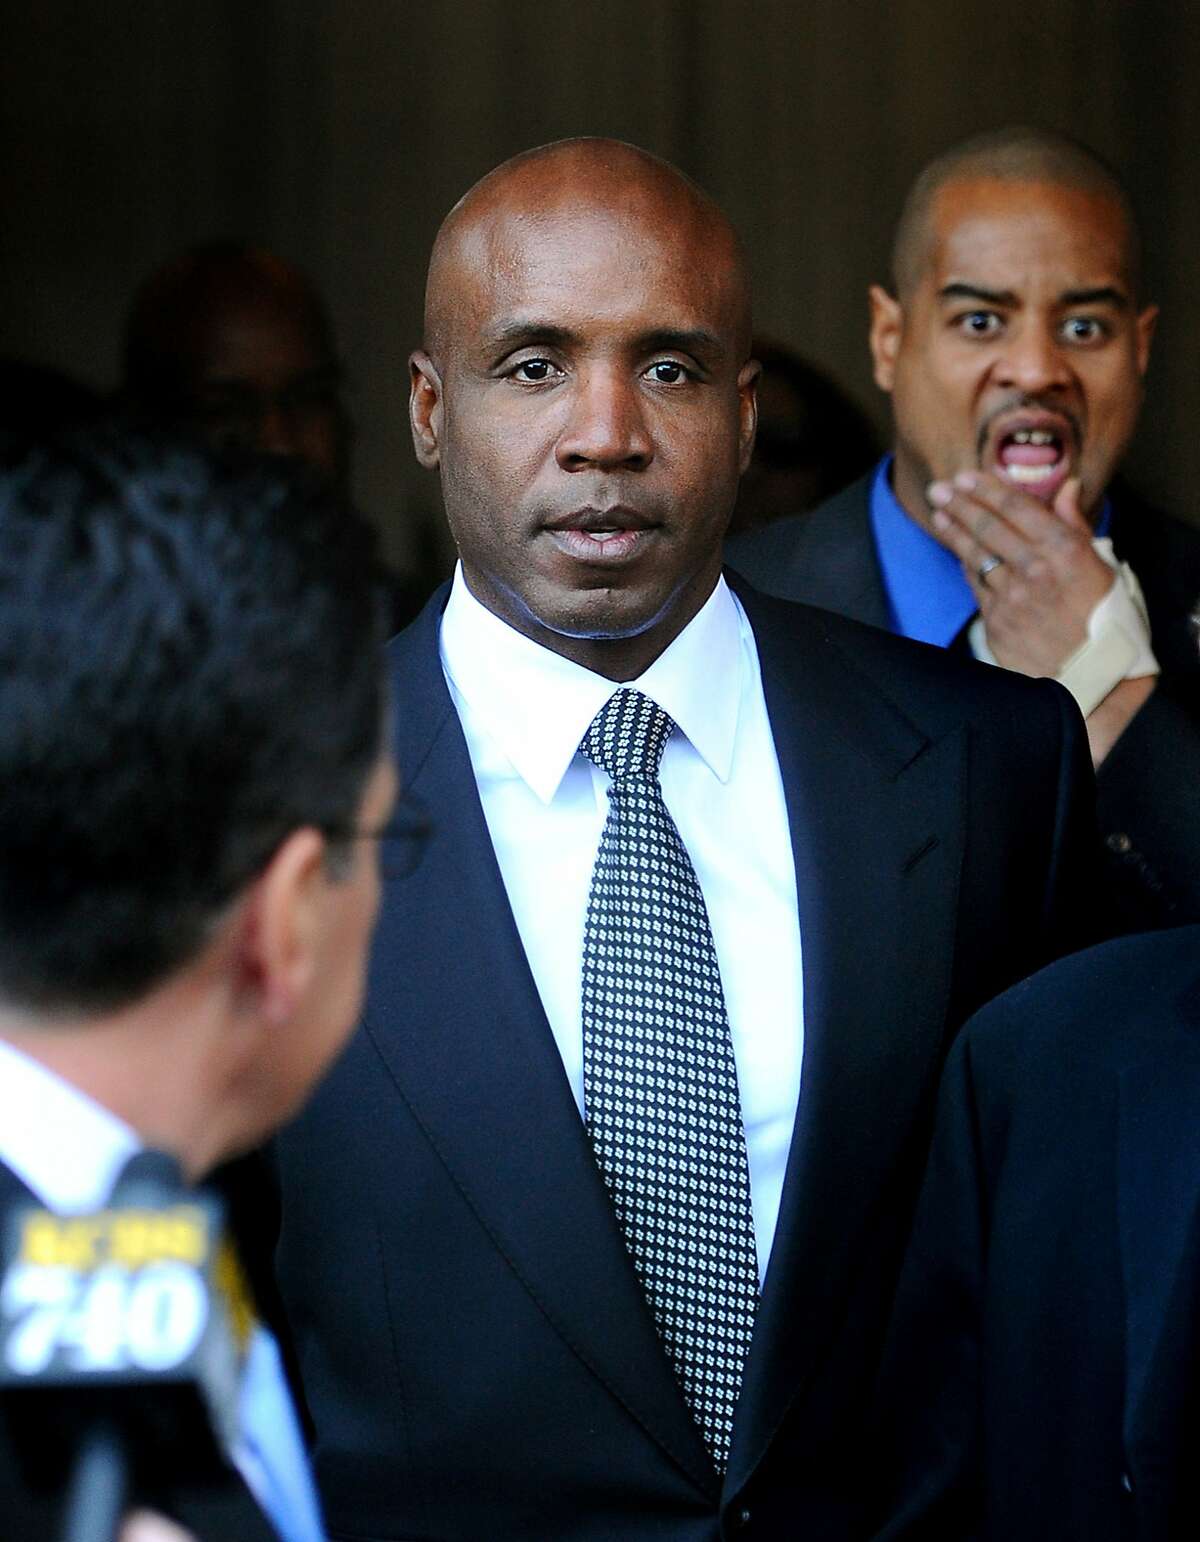 FILE - This Dec. 16, 2011 file photo shows former baseball player Barry Bonds leaving federal court after being sentenced for obstructing justice in a government steroids investigation, in San Francisco. (AP Photo/Noah Berger, File)